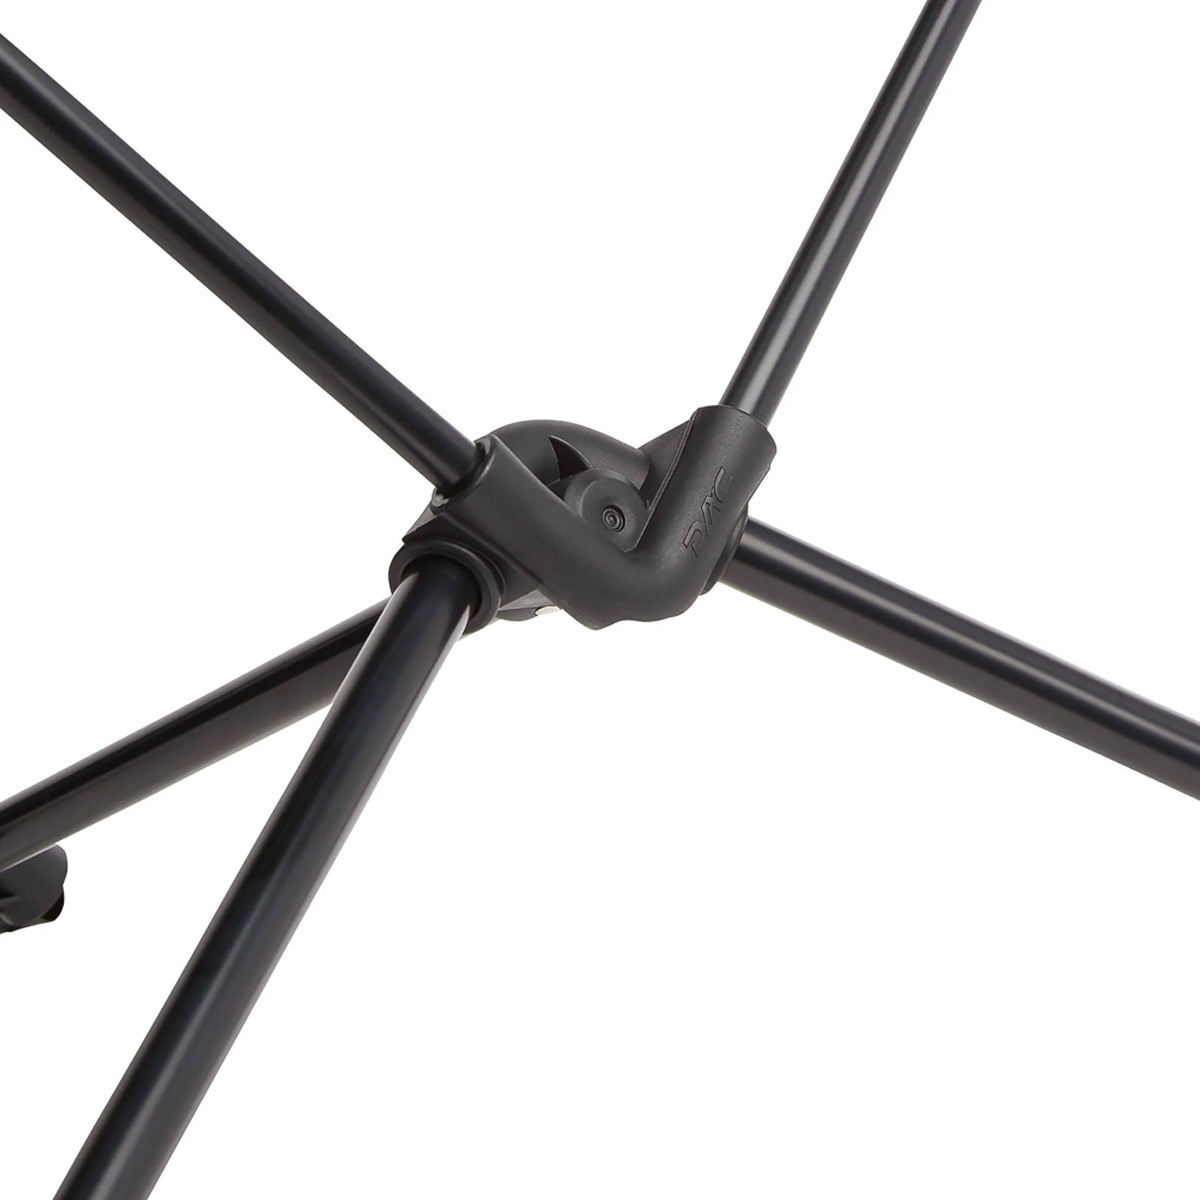 Helinox Tactical Table Regular frame, Made from DAC’s proprietary aluminum alloy